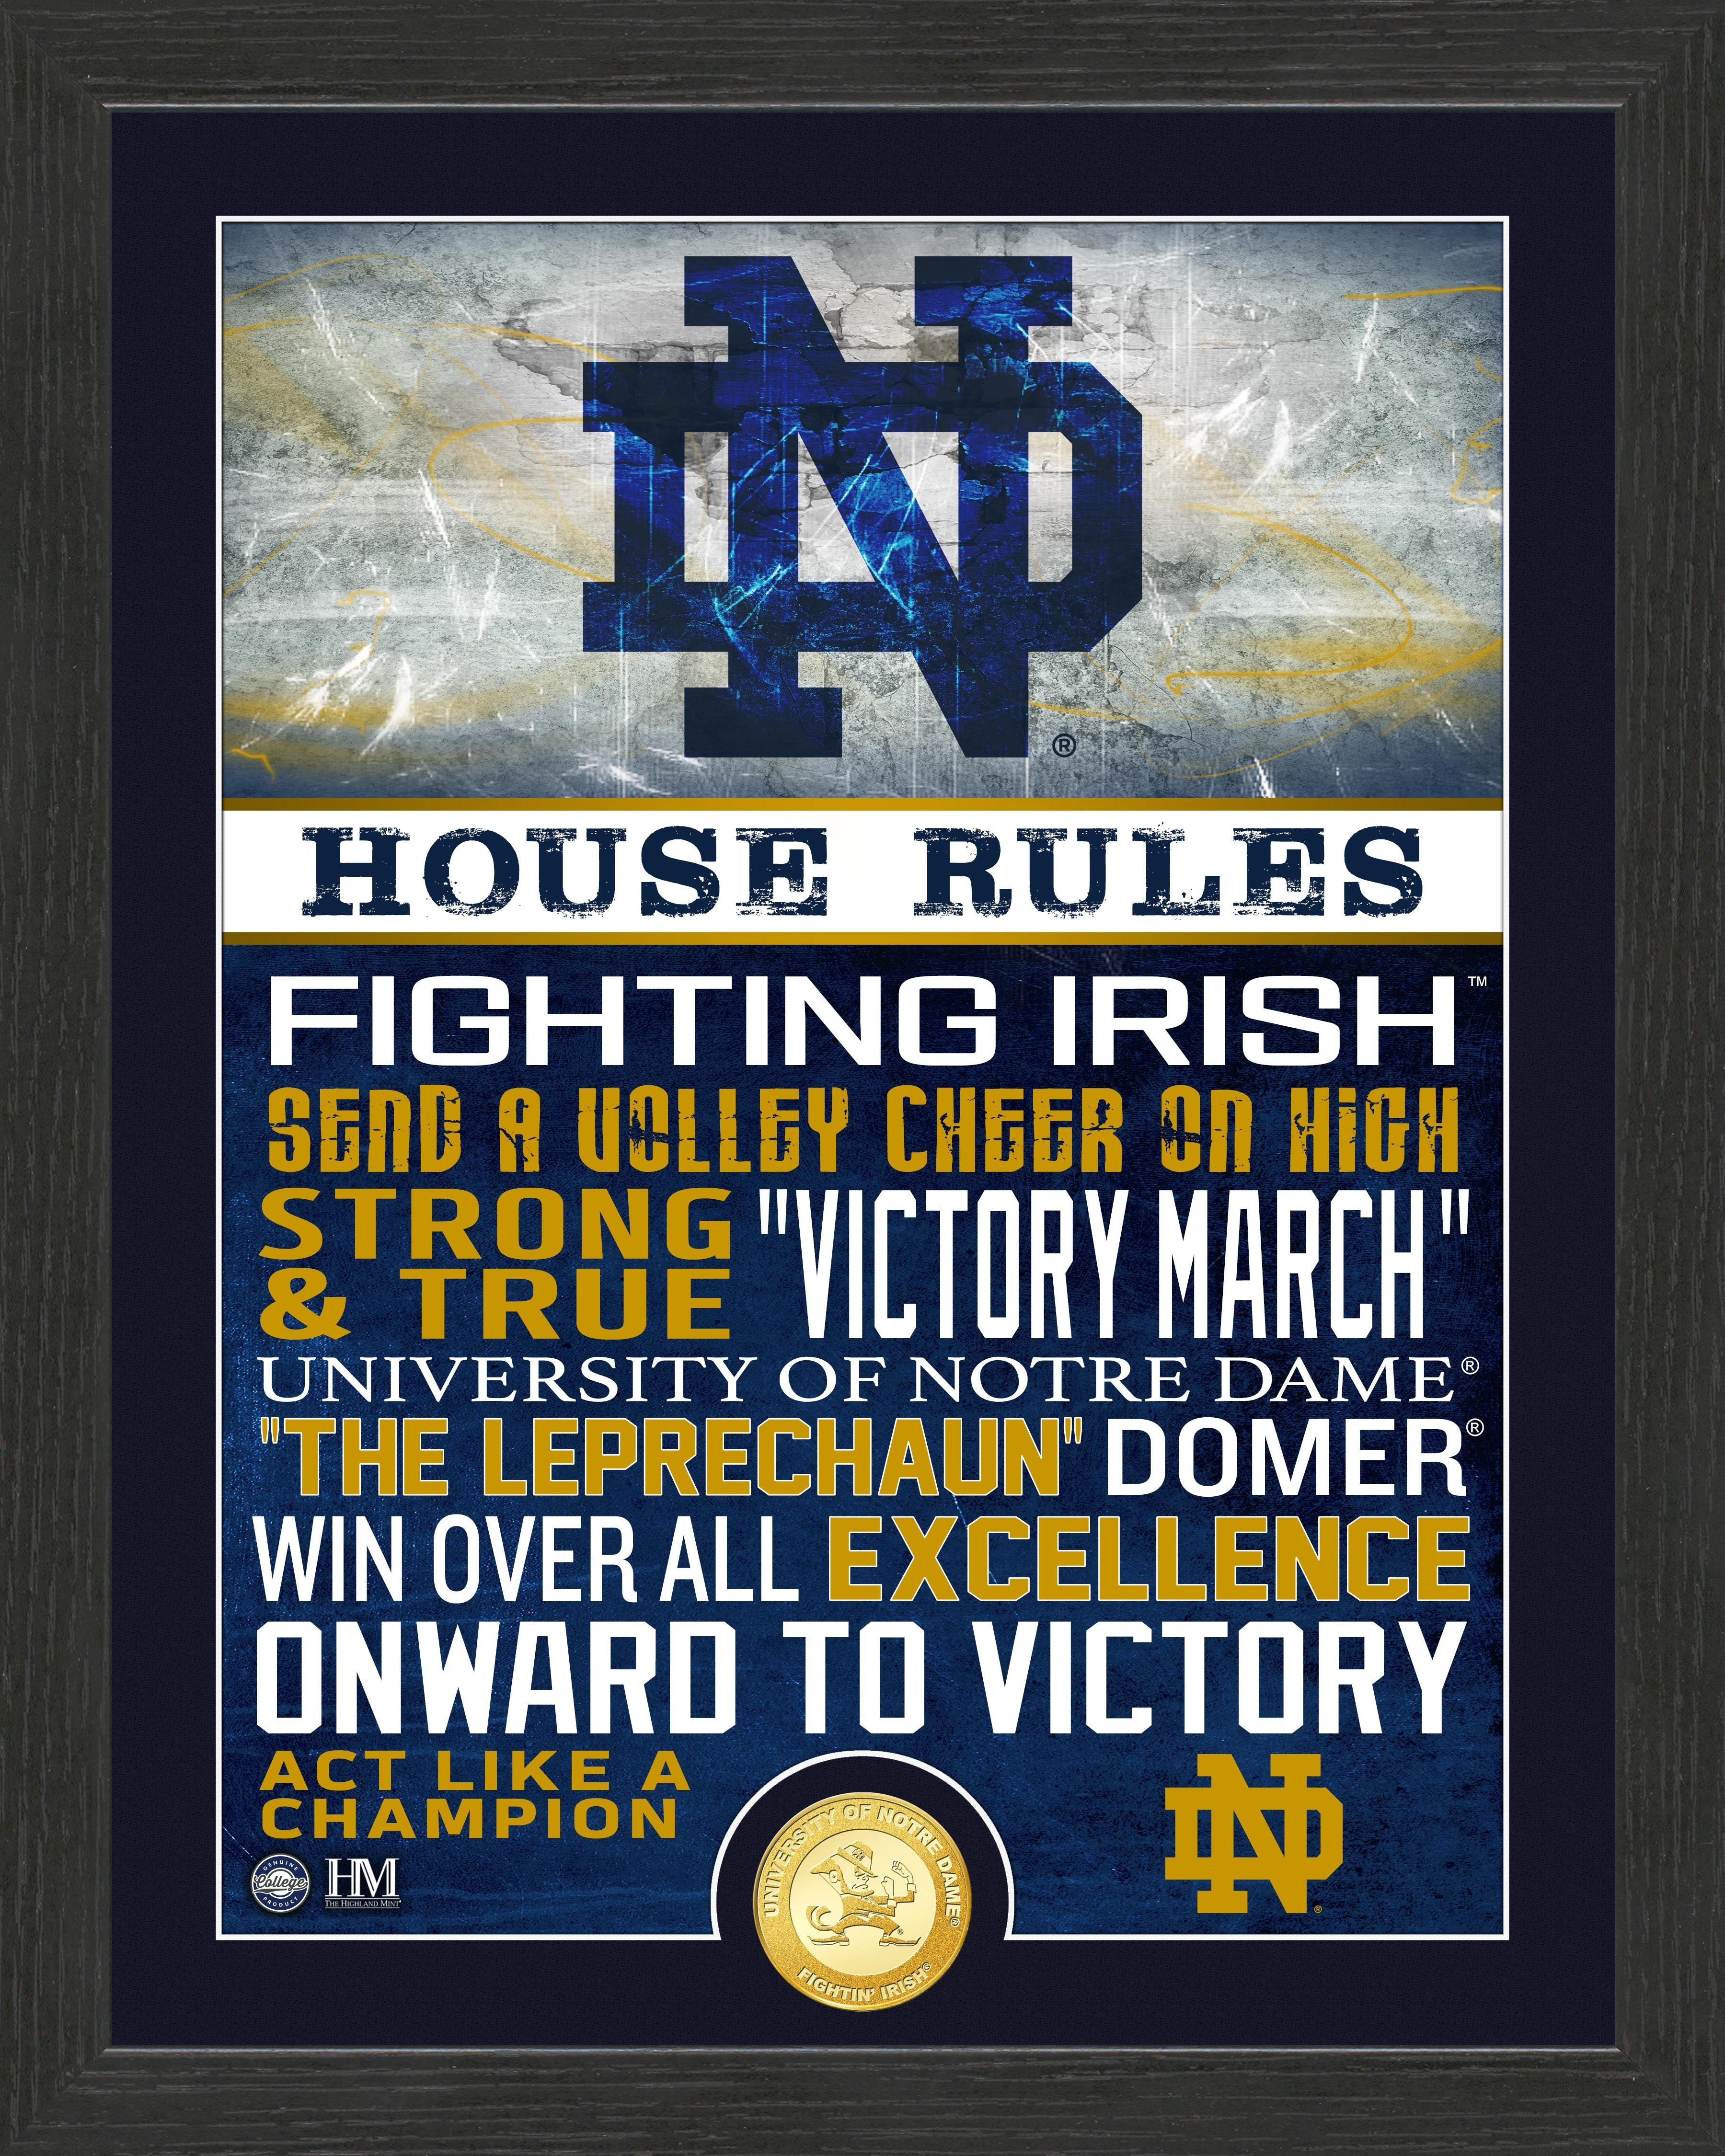 University of Notre Dame Fighitng Irish House Rules Bronze Coin Photo Mint